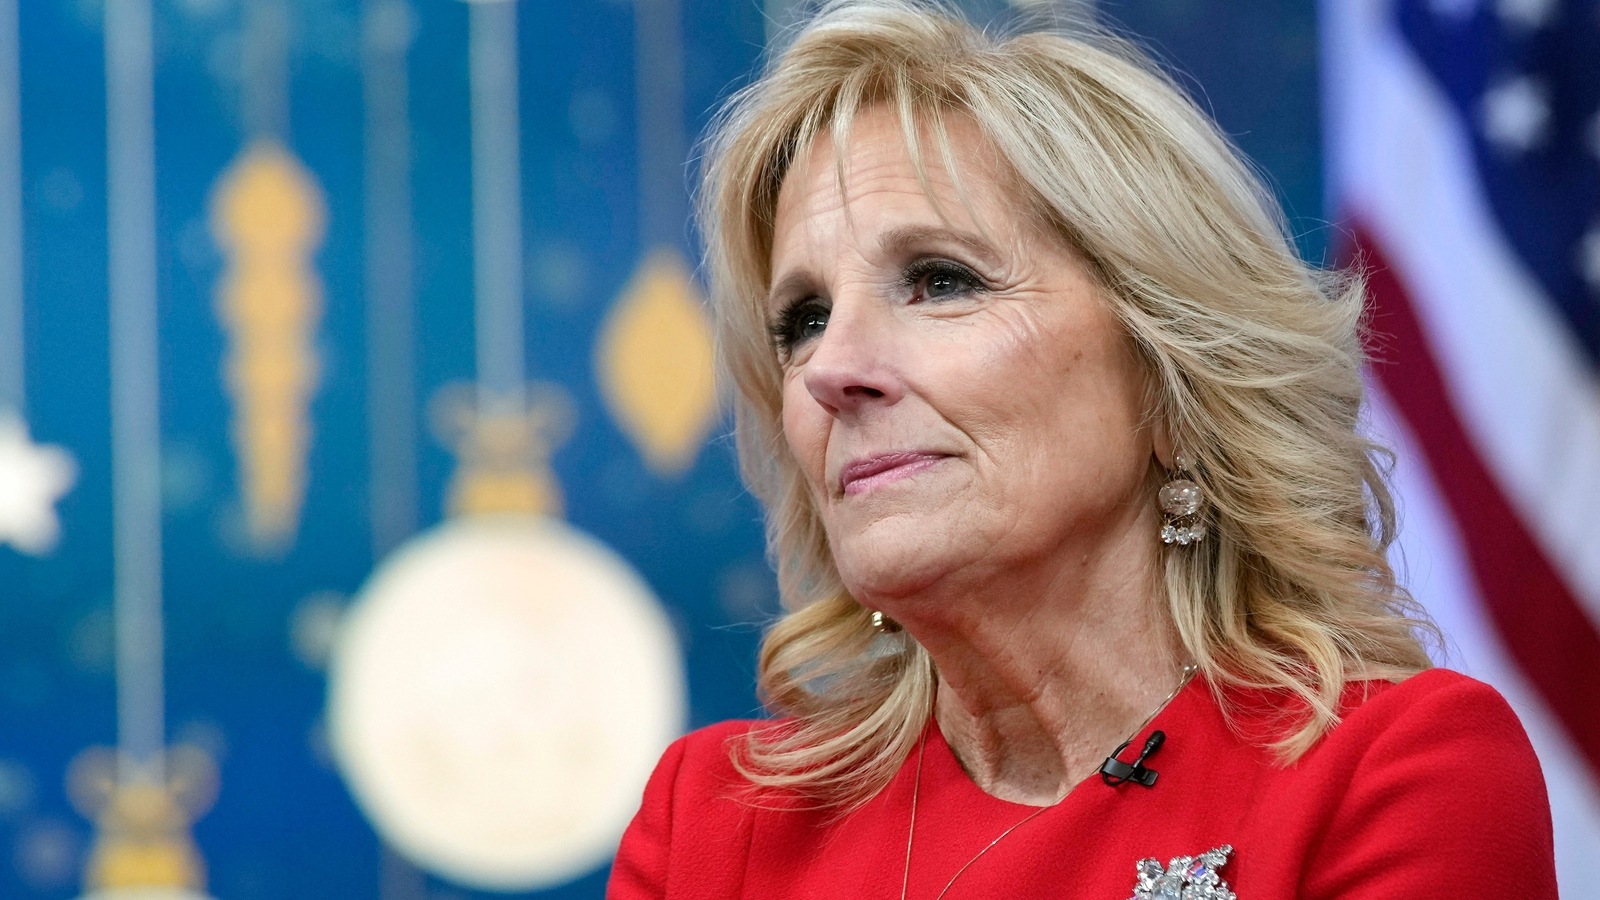 Jill Biden is cancer-free: Update on US first lady's health after surgery